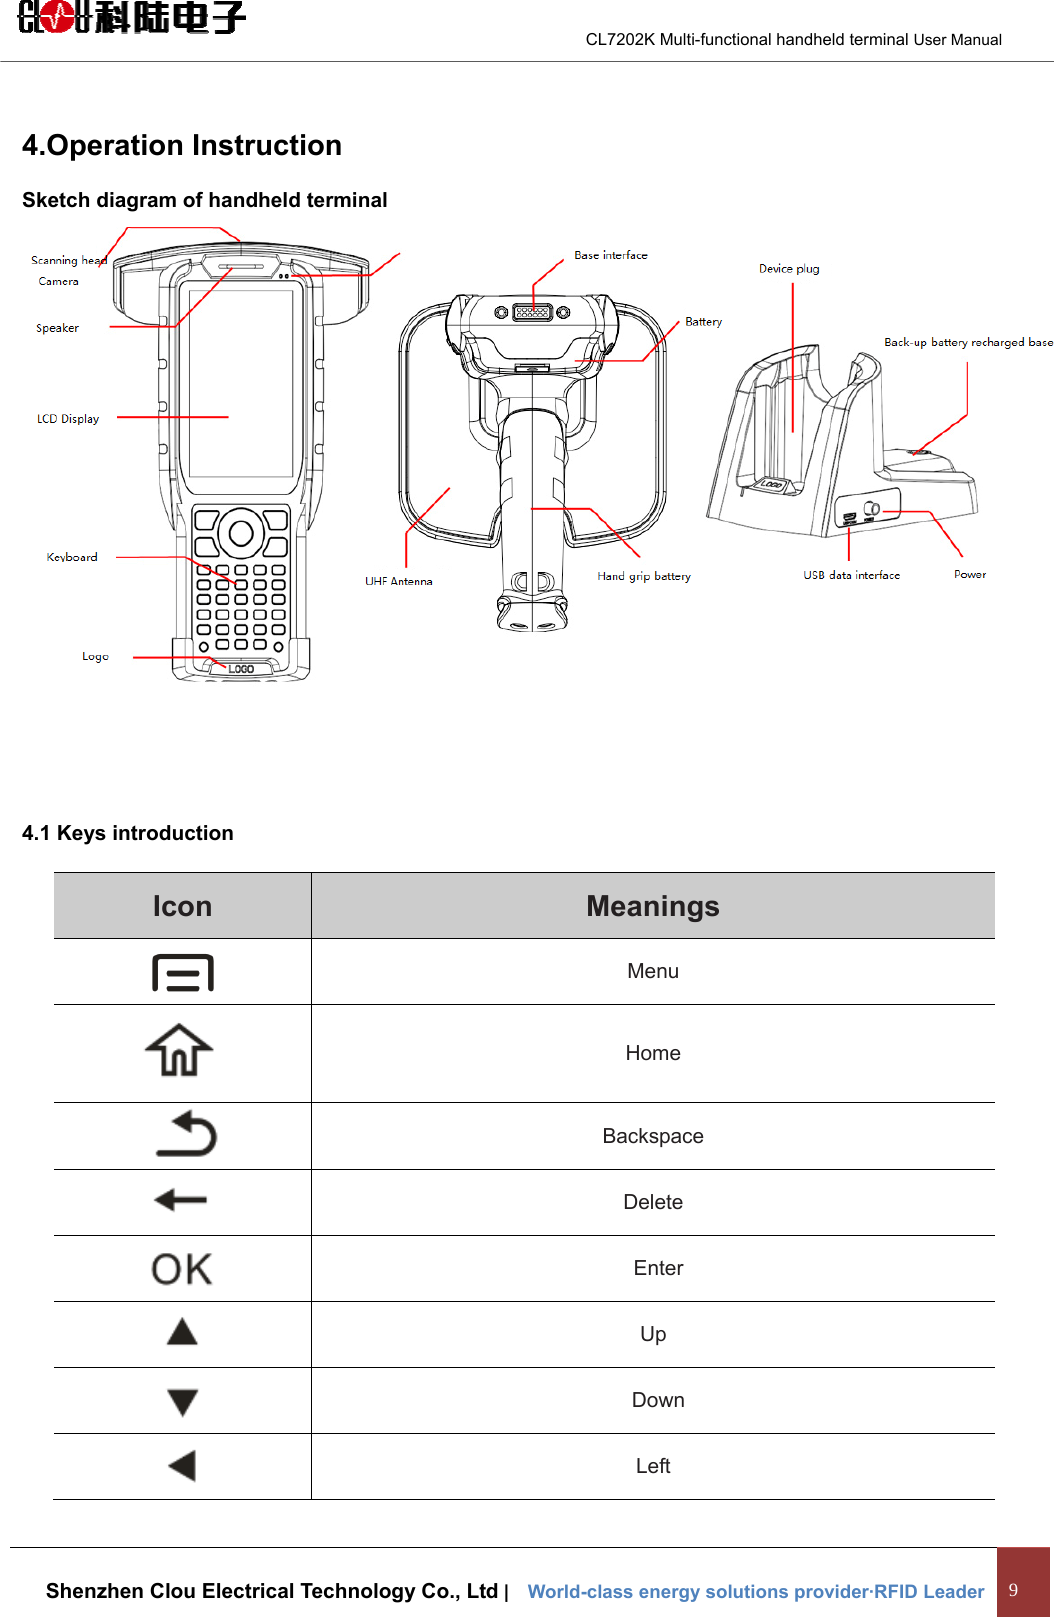                                        CL7202K Multi-functional handheld terminal User Manual   Shenzhen Clou Electrical Technology Co., Ltd |    World-class energy solutions provider·RFID Leader 9  4.Operation Instruction Sketch diagram of handheld terminal  4.1 Keys introduction Icon  Meanings  Menu  Home  Backspace  Delete   Enter  Up   Down  Left 